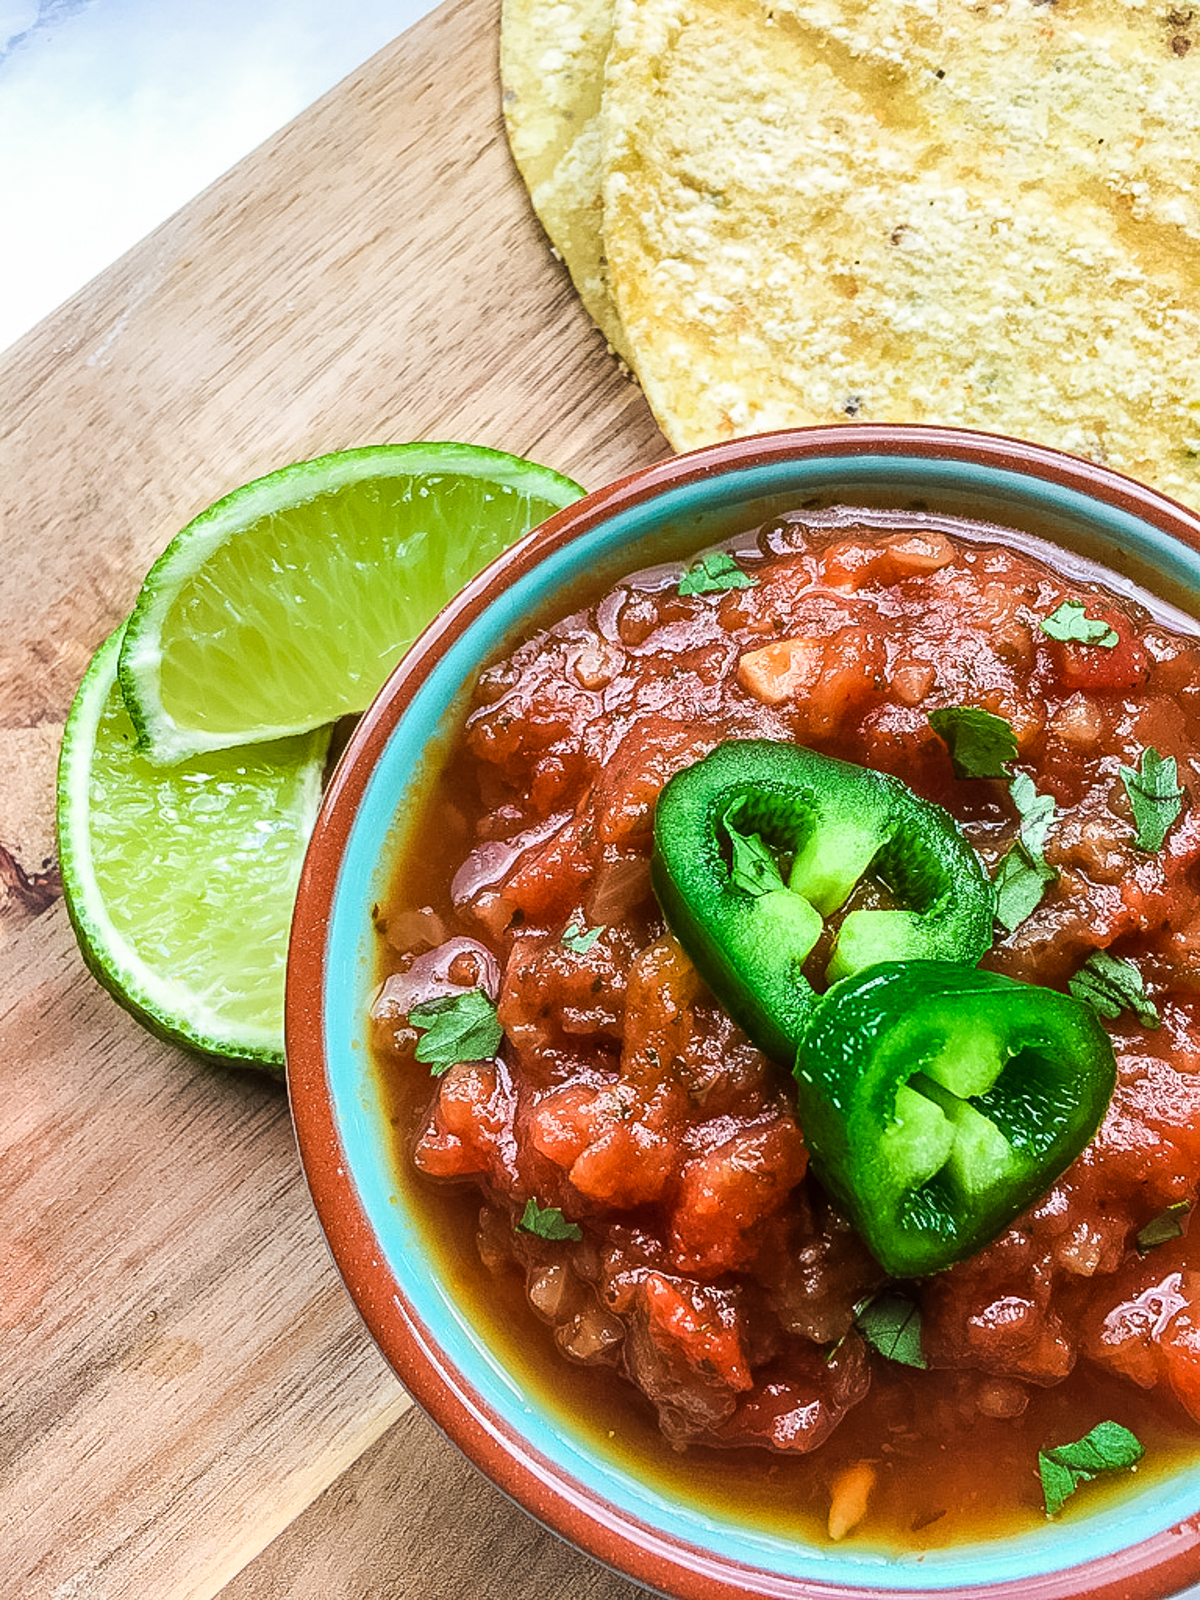 spicy salsa in a bowl with tortilla chips and limes on the table